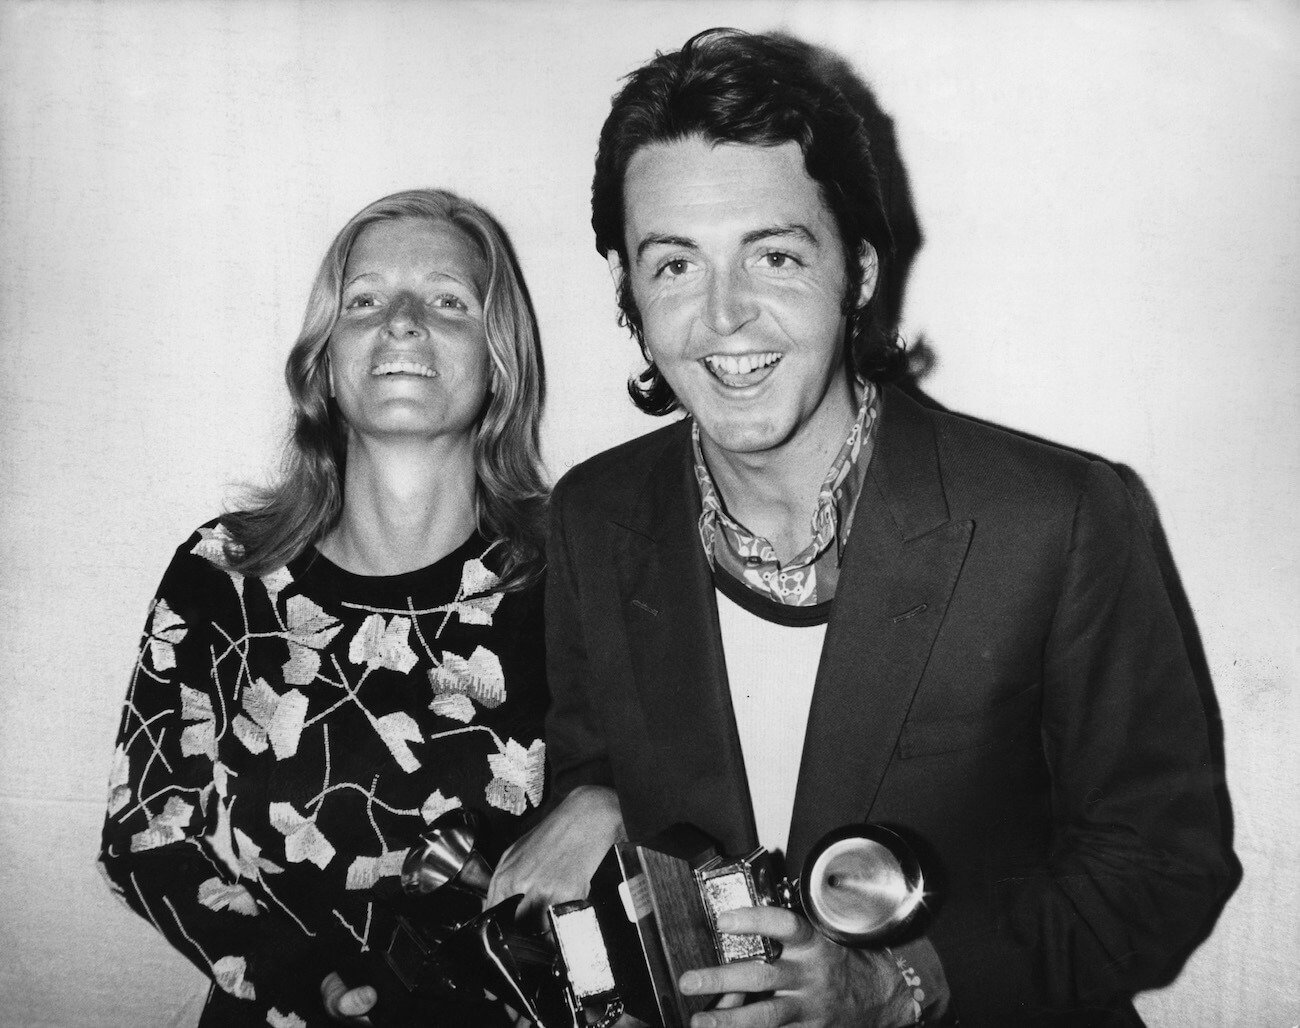 Paul McCartney and his wife at the 1971 Grammy Awards.